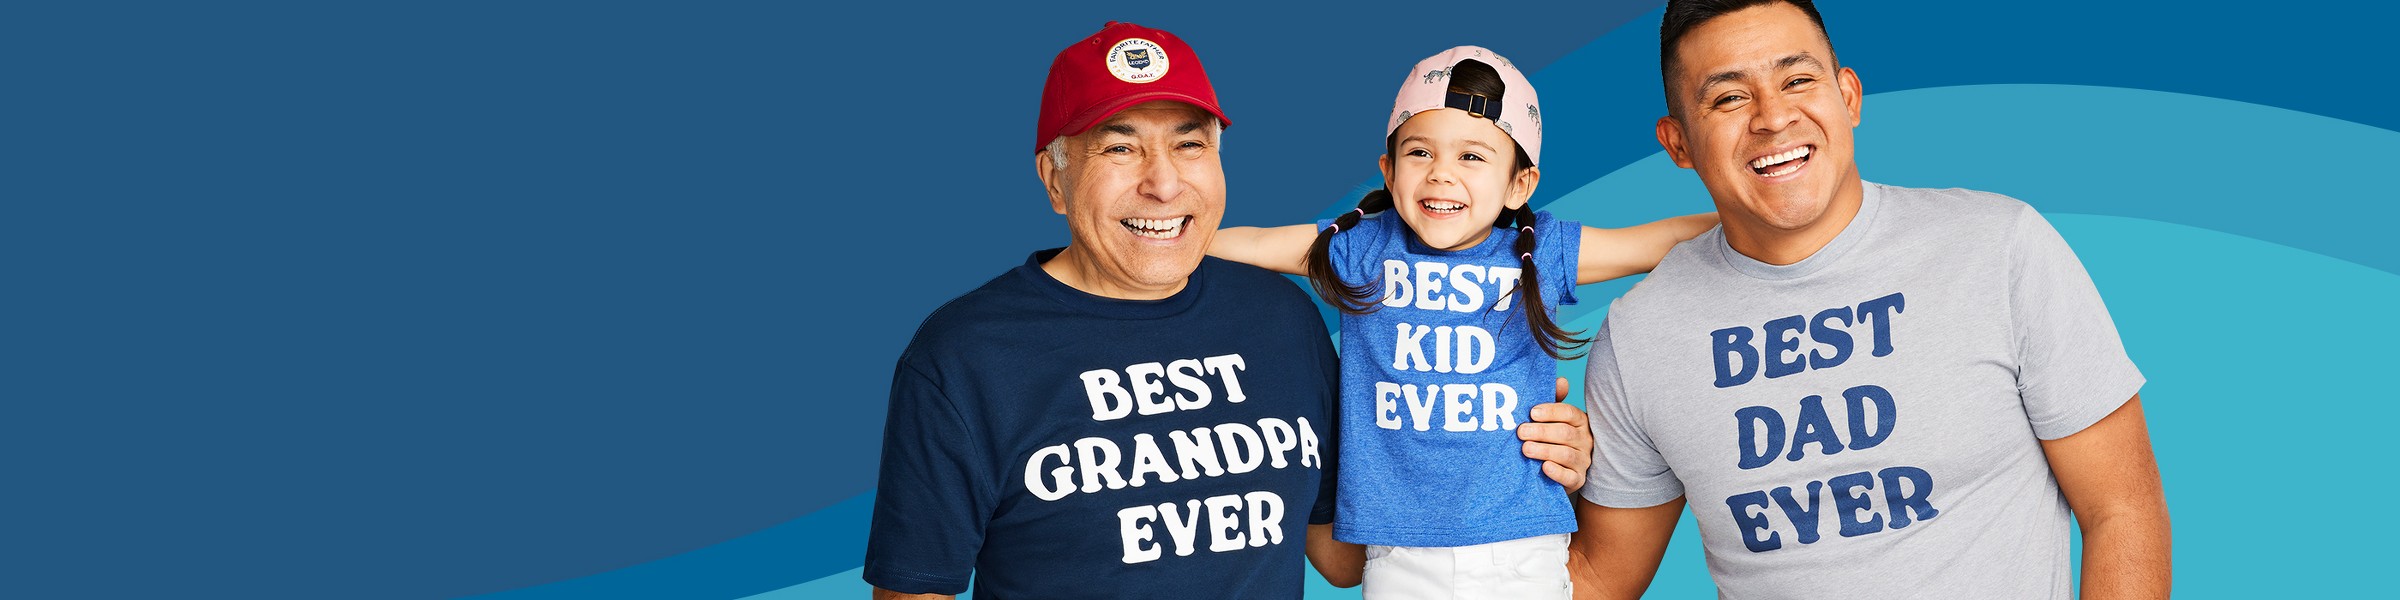 Make Dad's day Reach "Best Kid Ever" status with stylish gifts for all the super dads in your life.